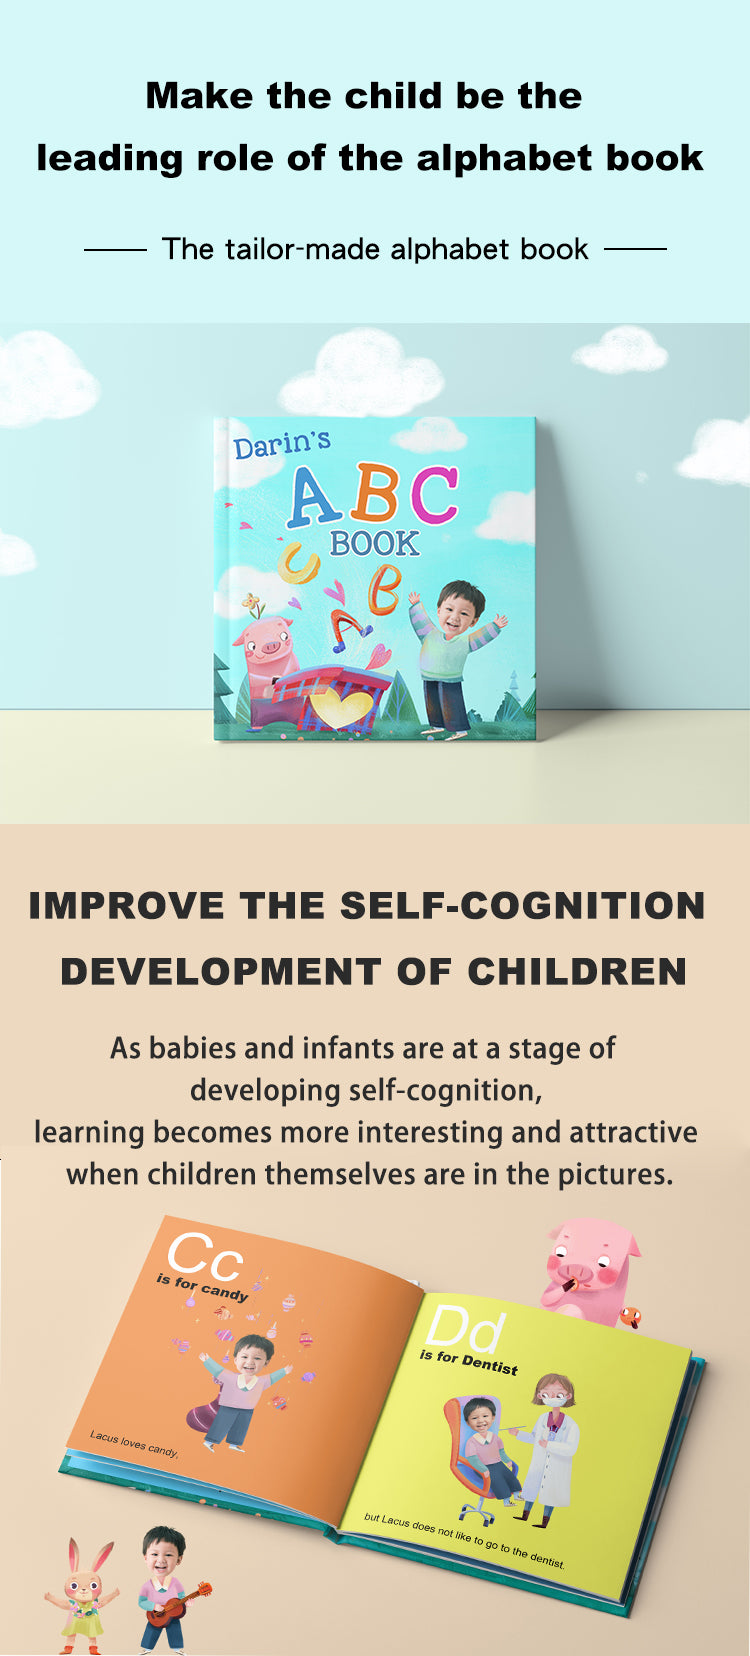 make the child be the leading role of the alphabet book, improve the self cognition development of children. as babies and infants are at a stage of developing self-cognition, learning becomes more interesting and attractive when children themselves are in the pictures.